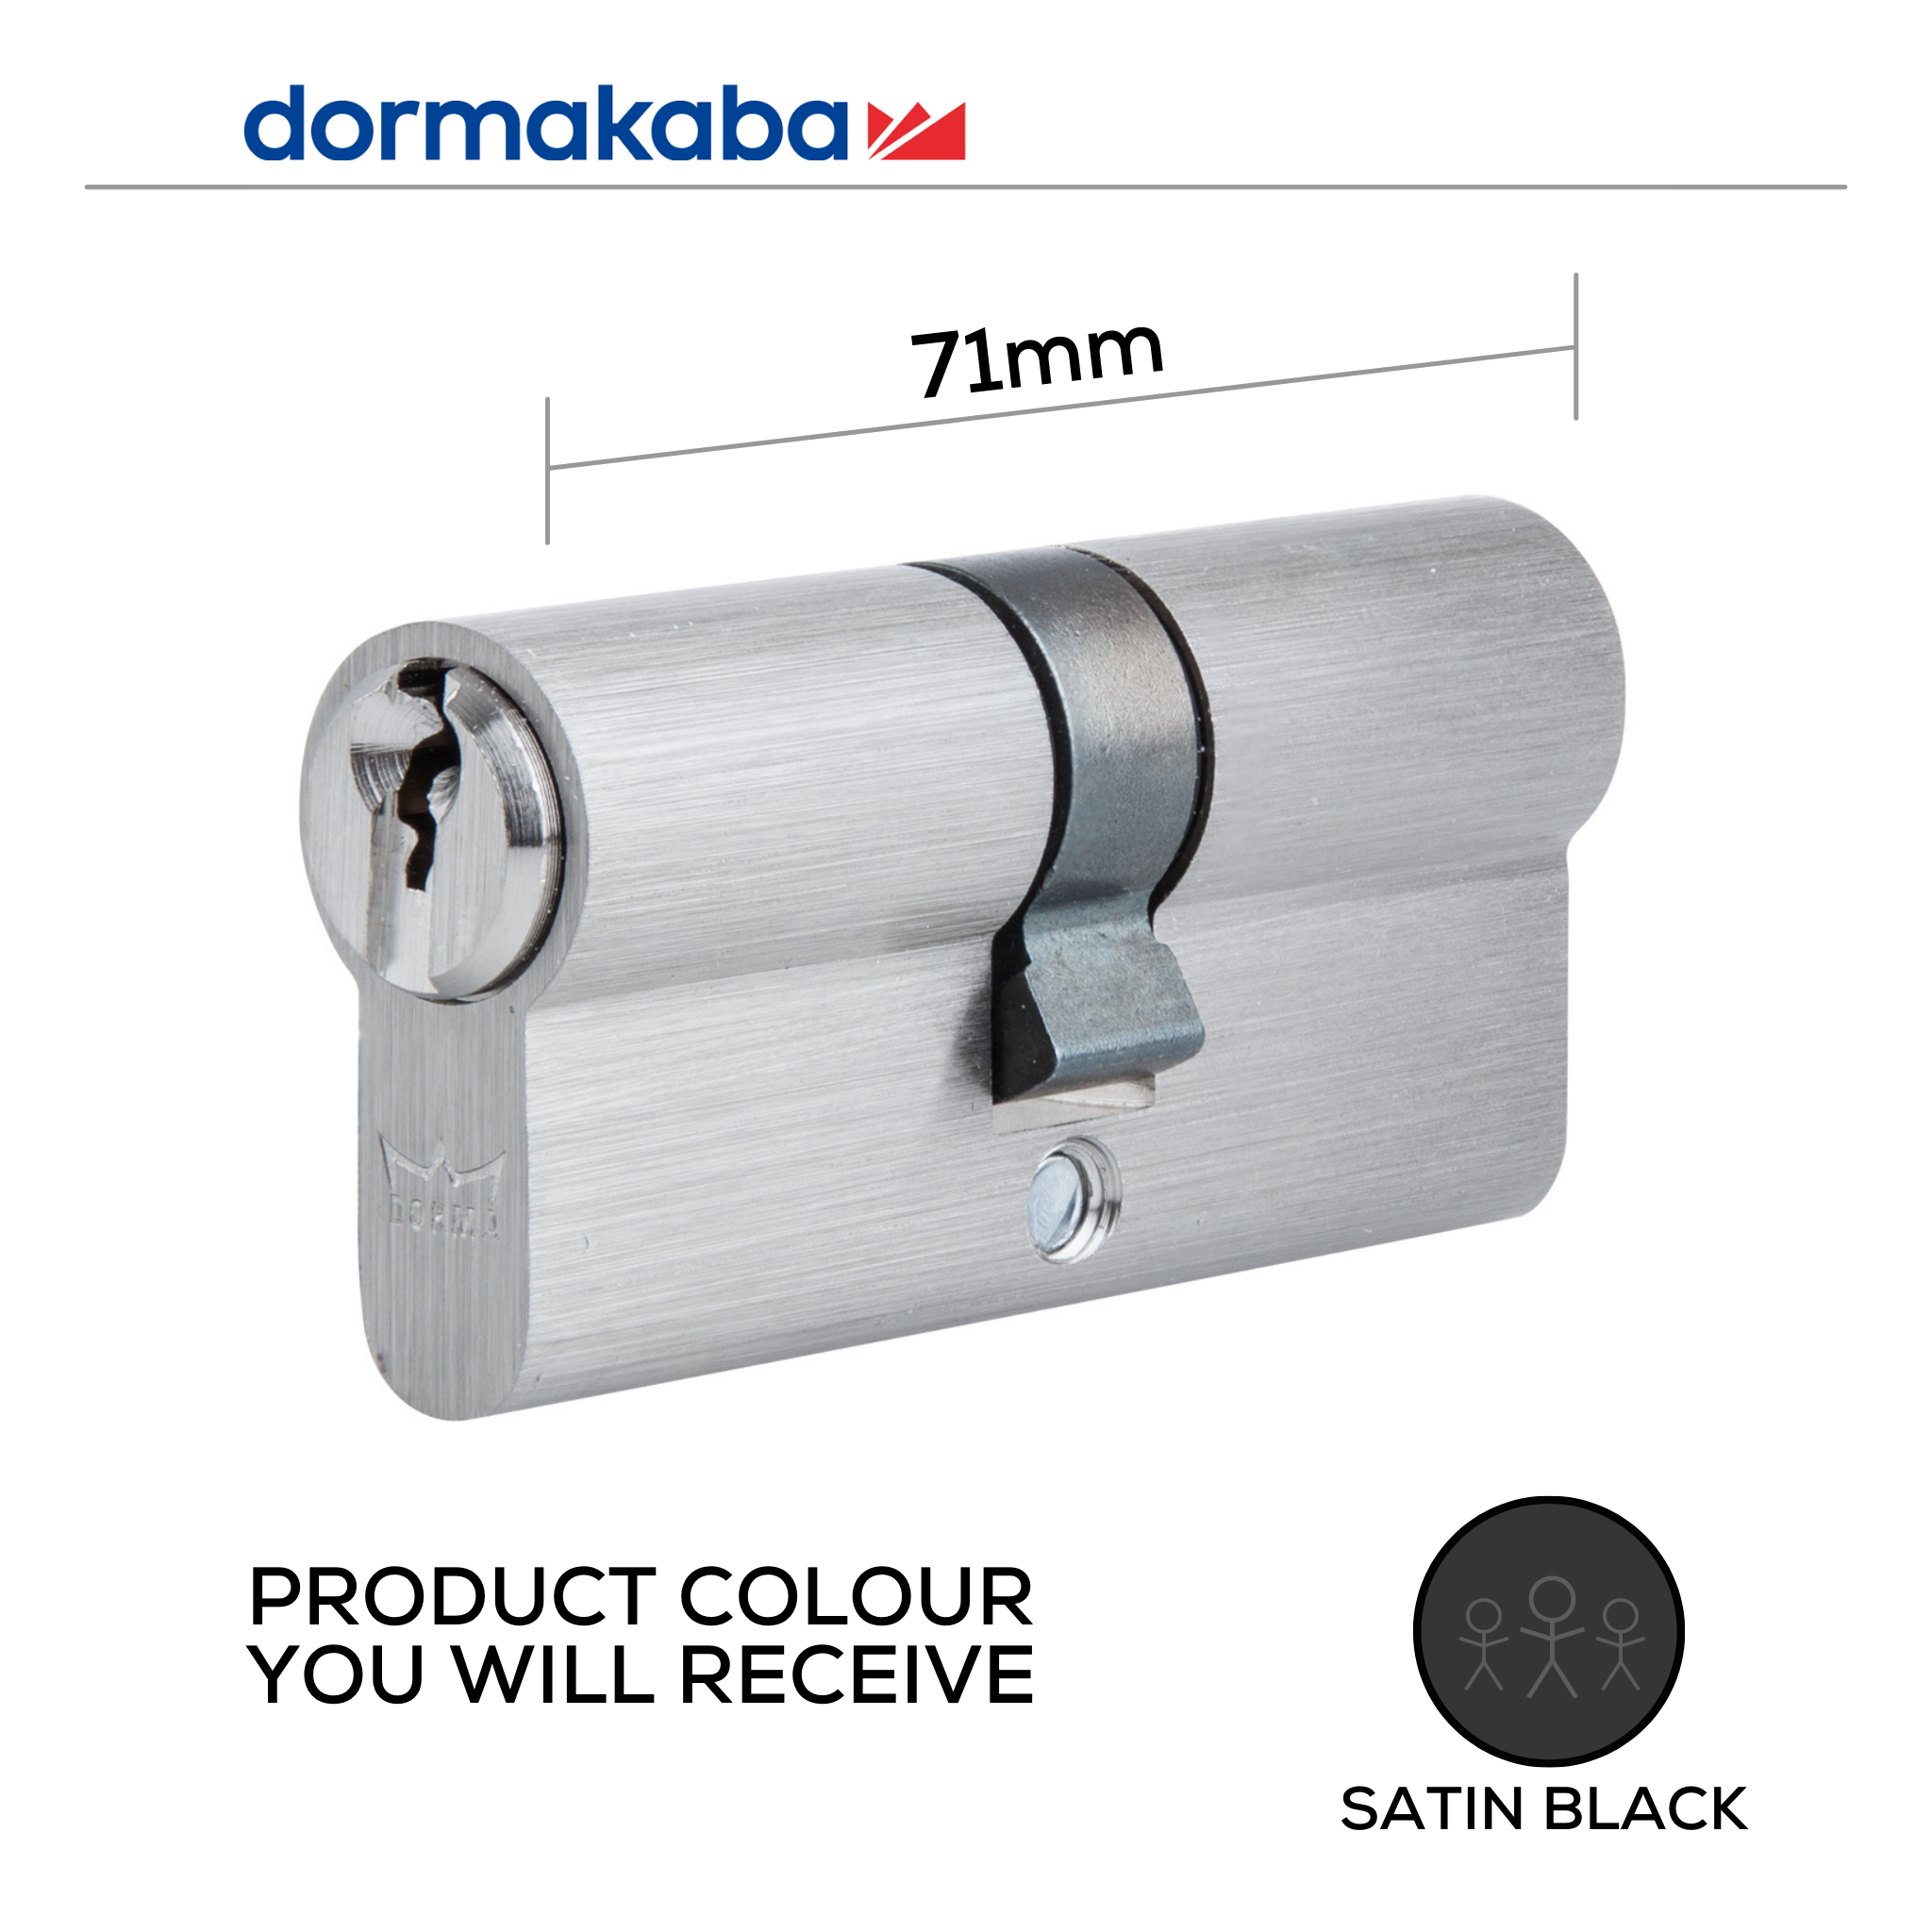 DDC207102 KD, 71mm (l), Double, Cylinder, Keyed Different, 5 Pin, Satin Black, DORMAKABA